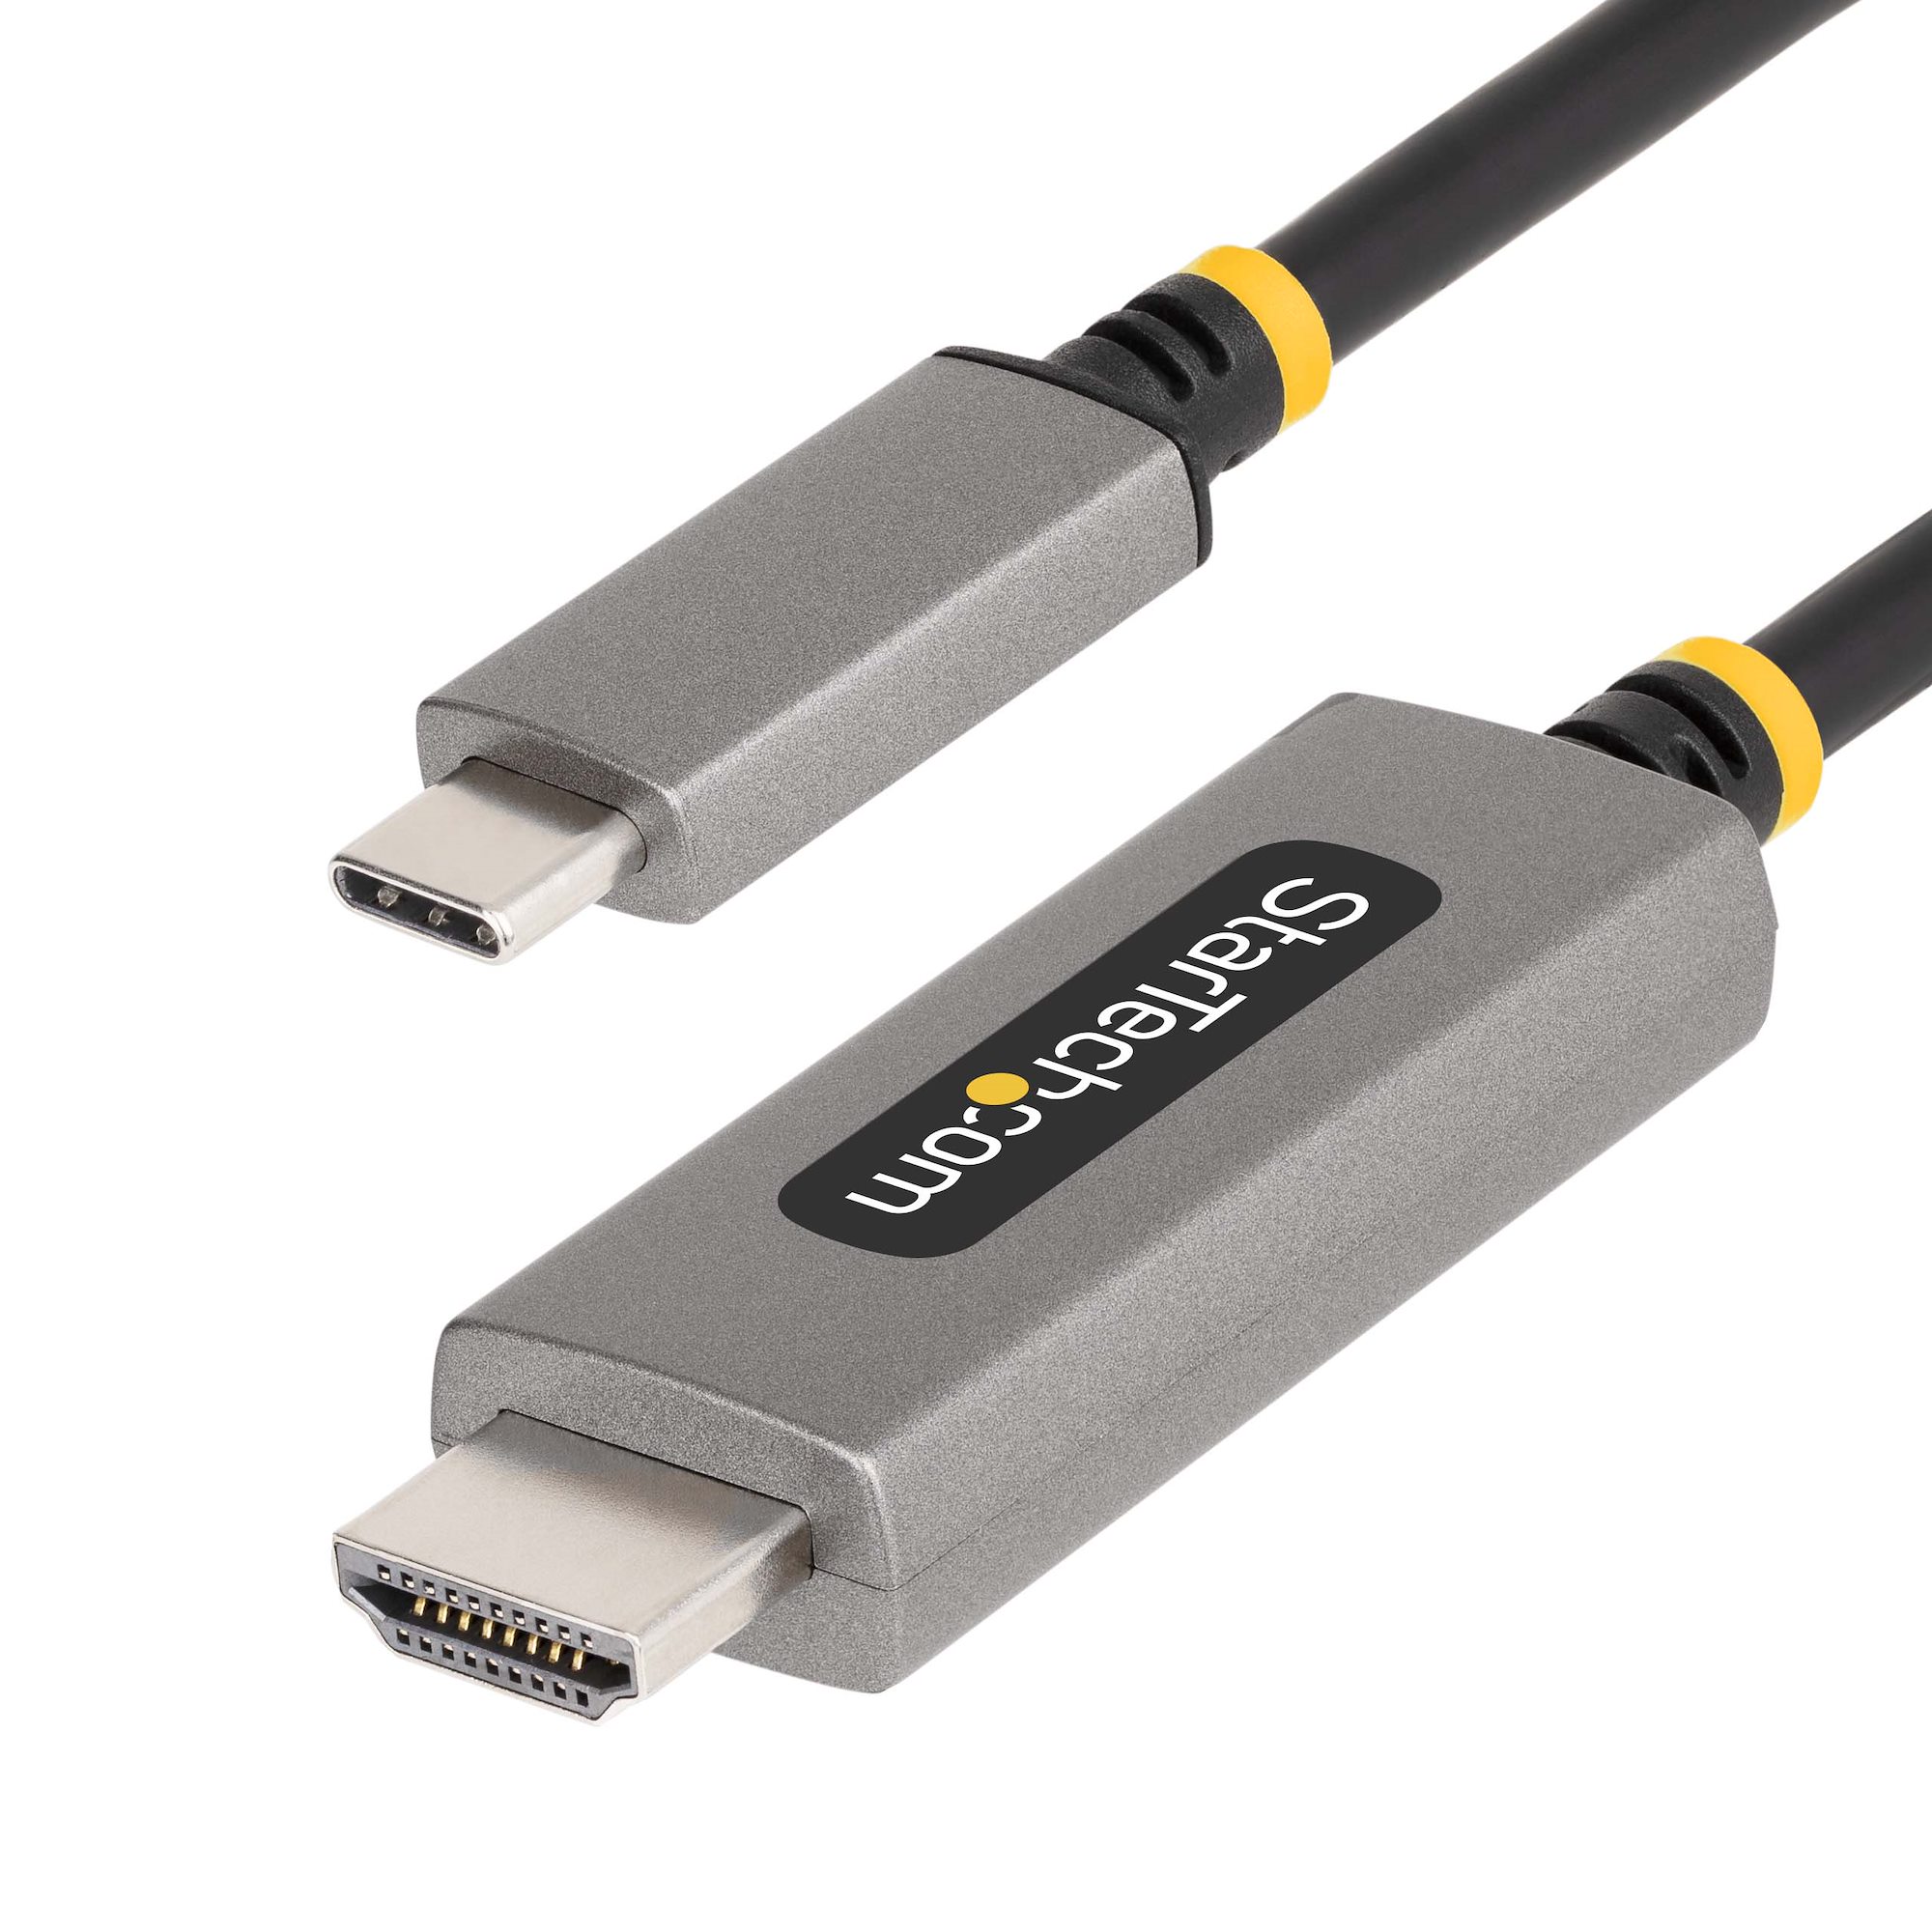 【134B-USBC-HDMI211M】USB-C TO HDMI ADAPTER CABLE